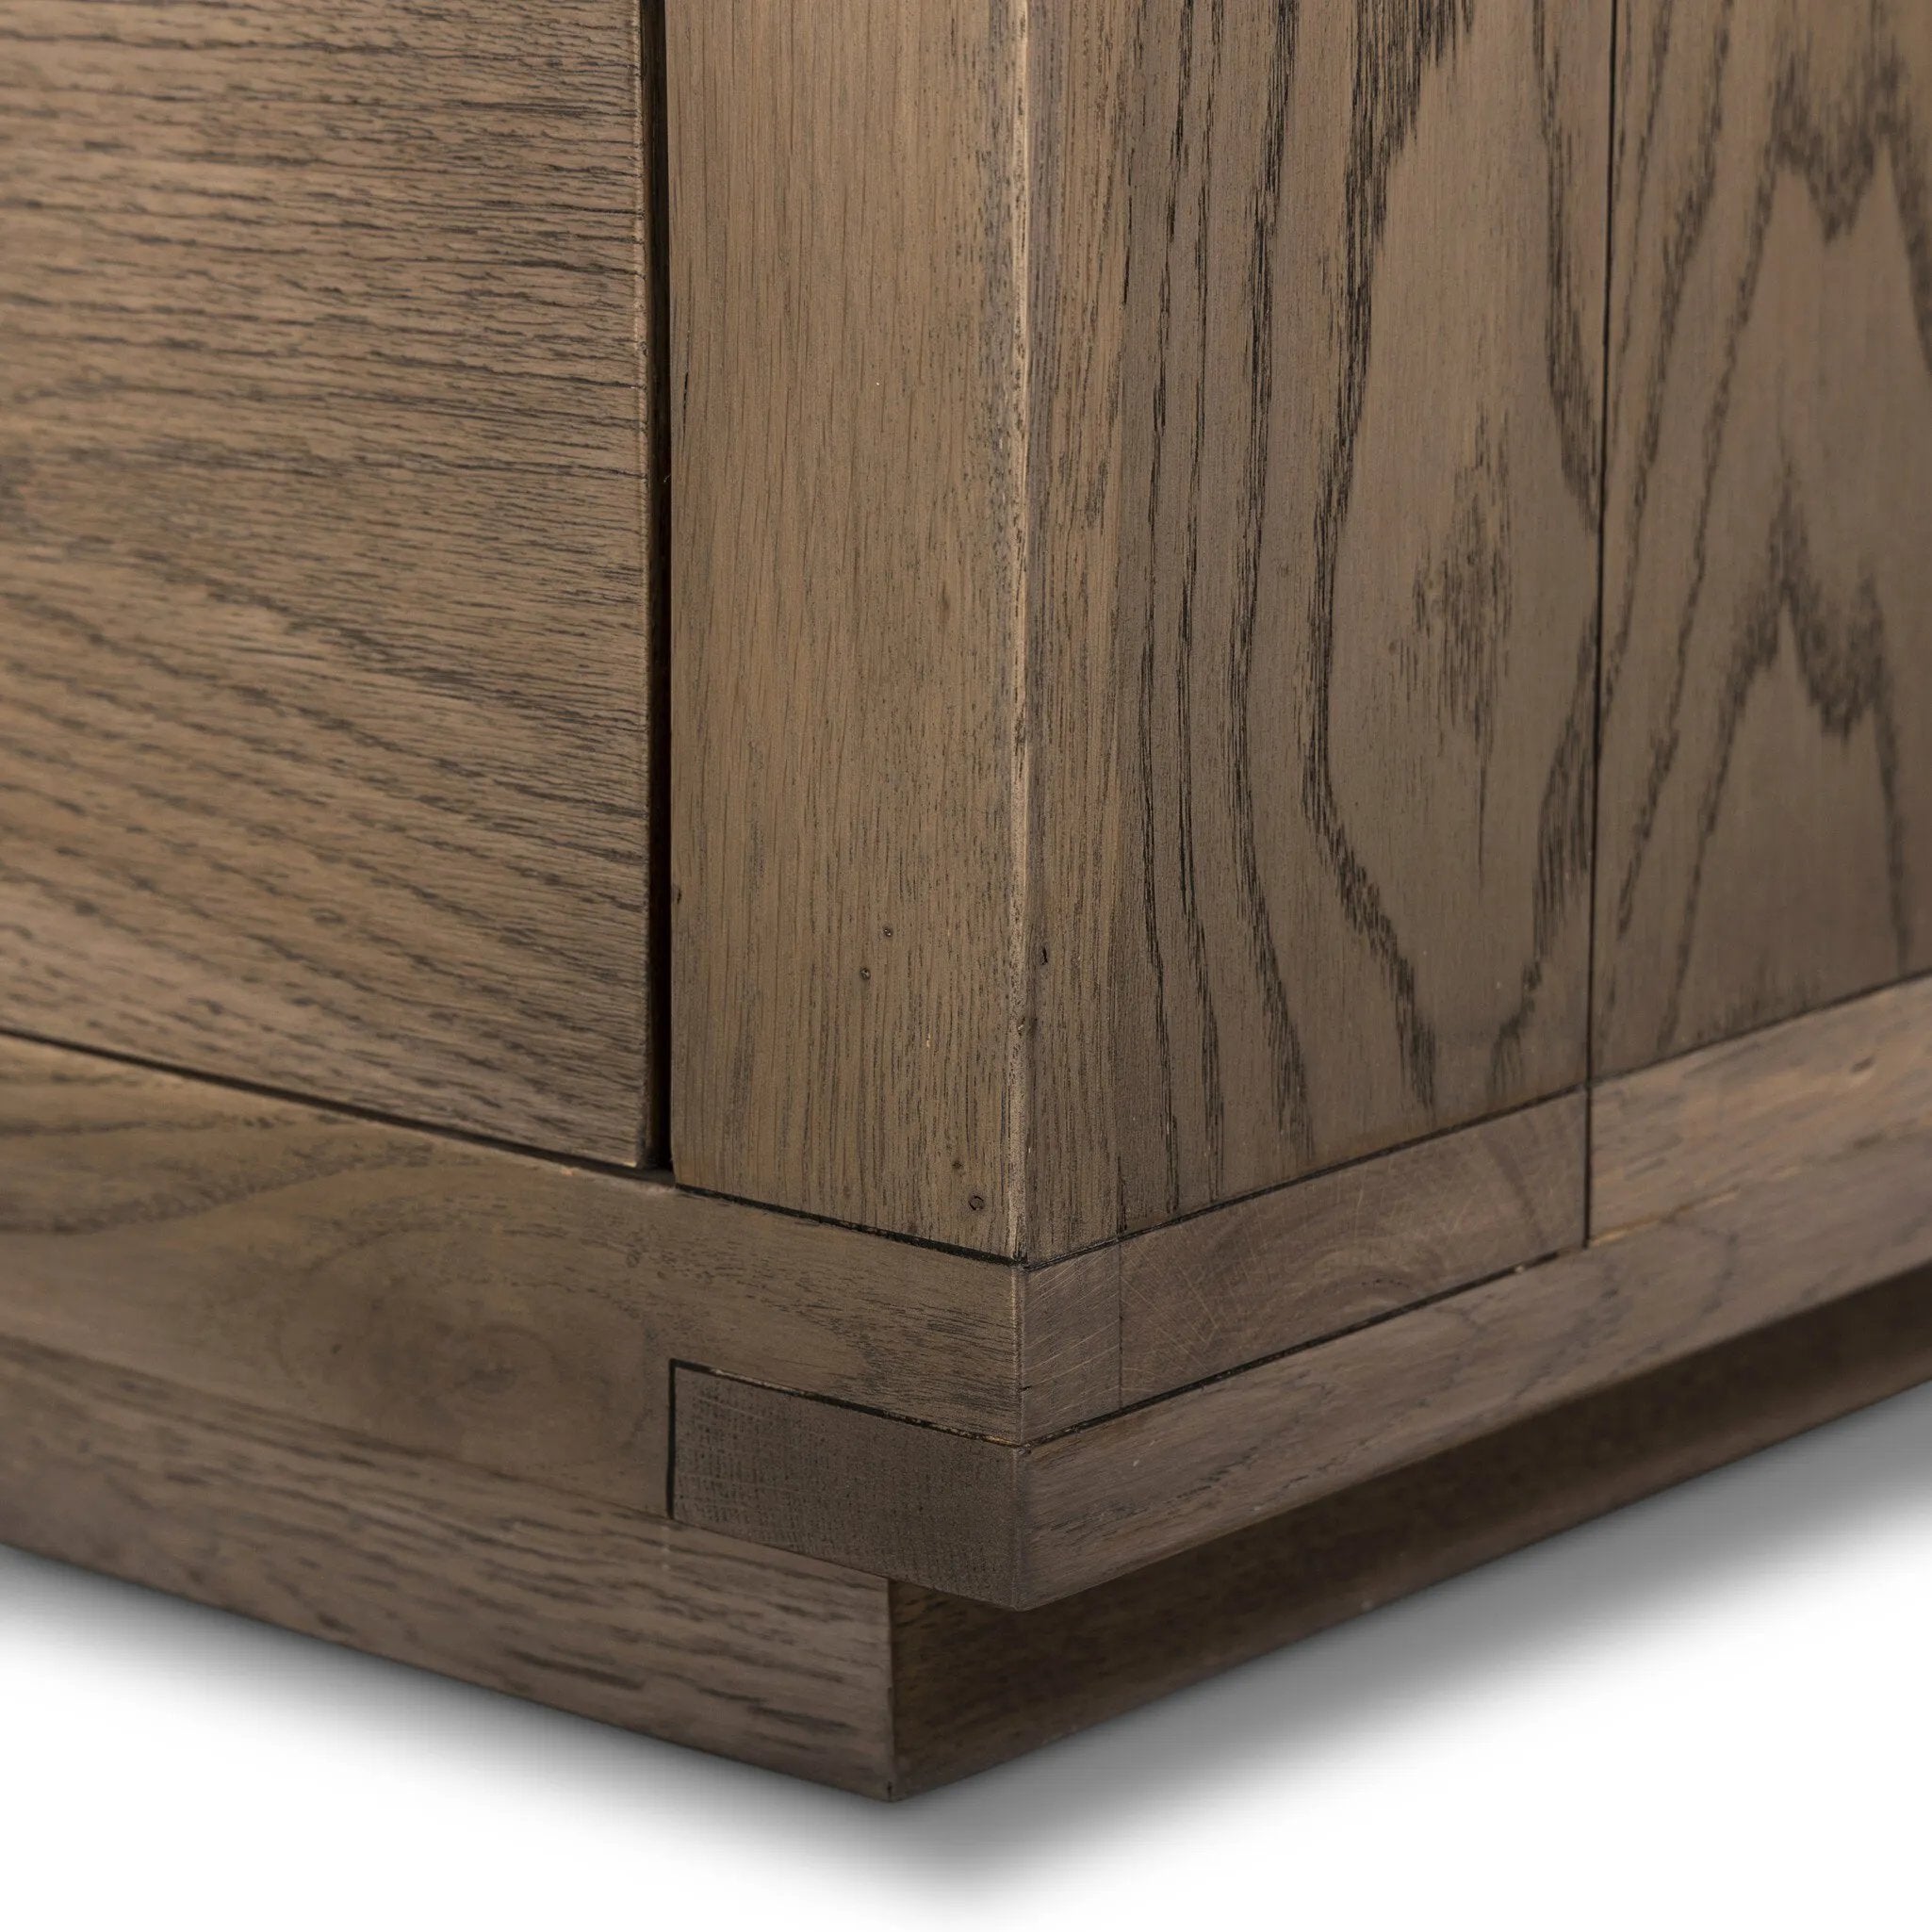 Worn oak shapes a streamlined box-style dresser, with lap joint corners for a detail-driven touch.Collection: Bennet Amethyst Home provides interior design, new home construction design consulting, vintage area rugs, and lighting in the Salt Lake City metro area.